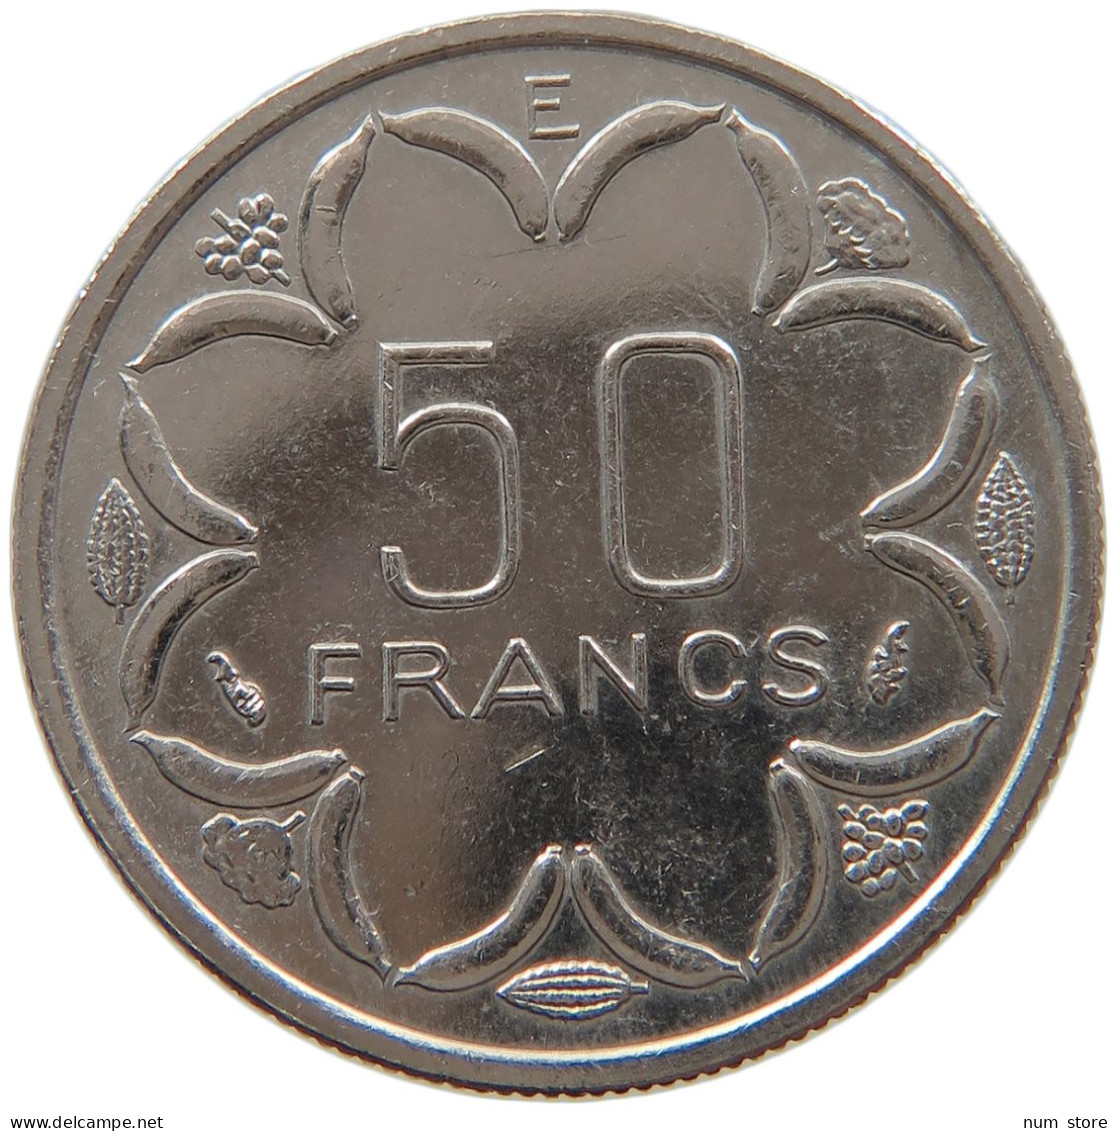 CENTRAL AFRICAN STATES 50 FRANCS 1986  #MA 065259 - Central African Republic